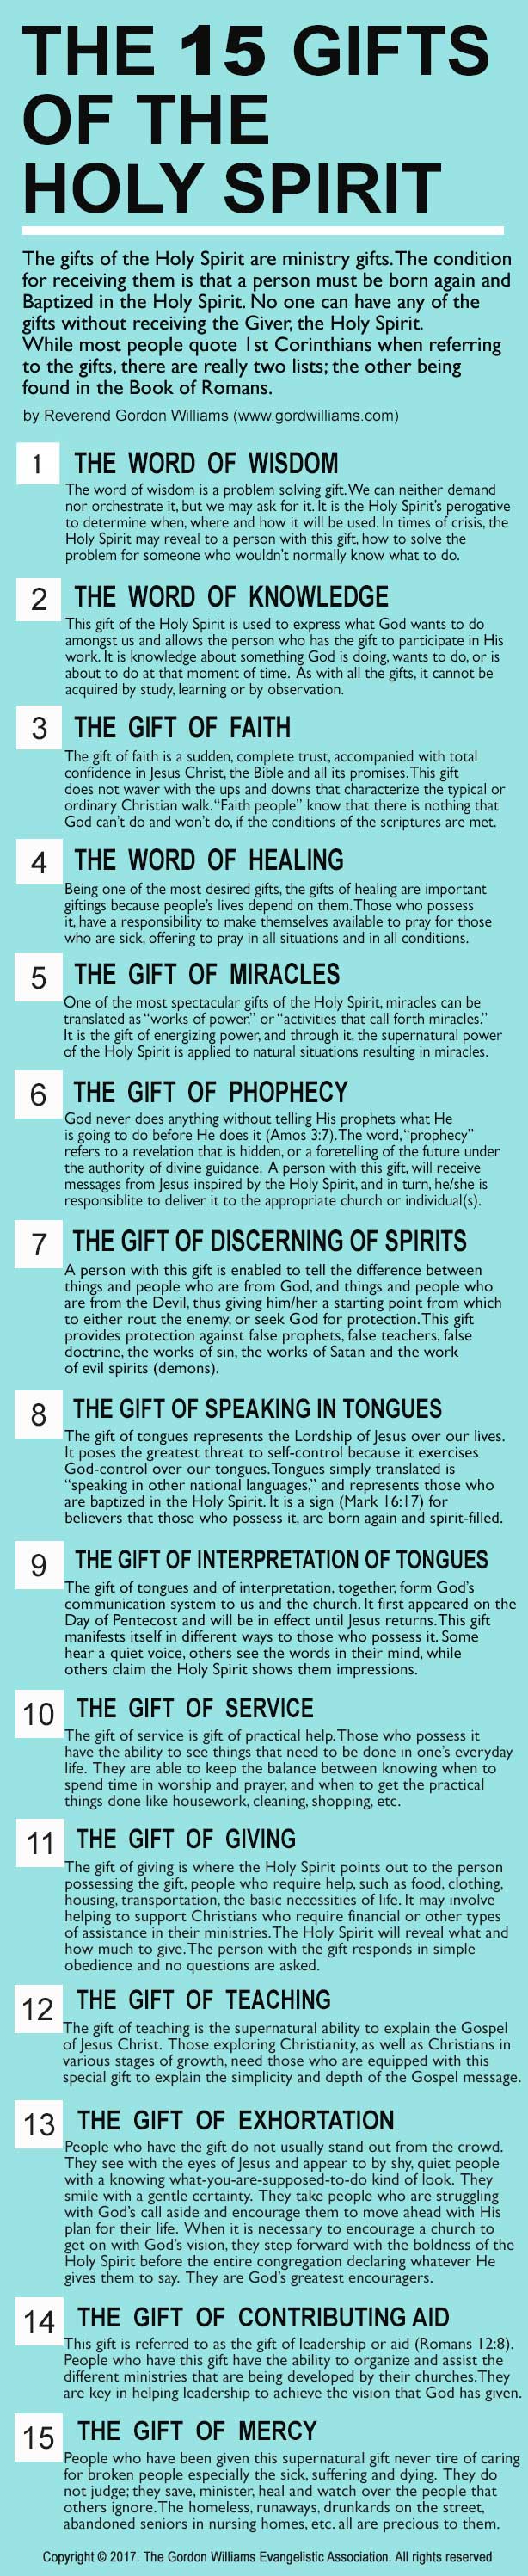 The gifts of the Holy Spirit Infographic.